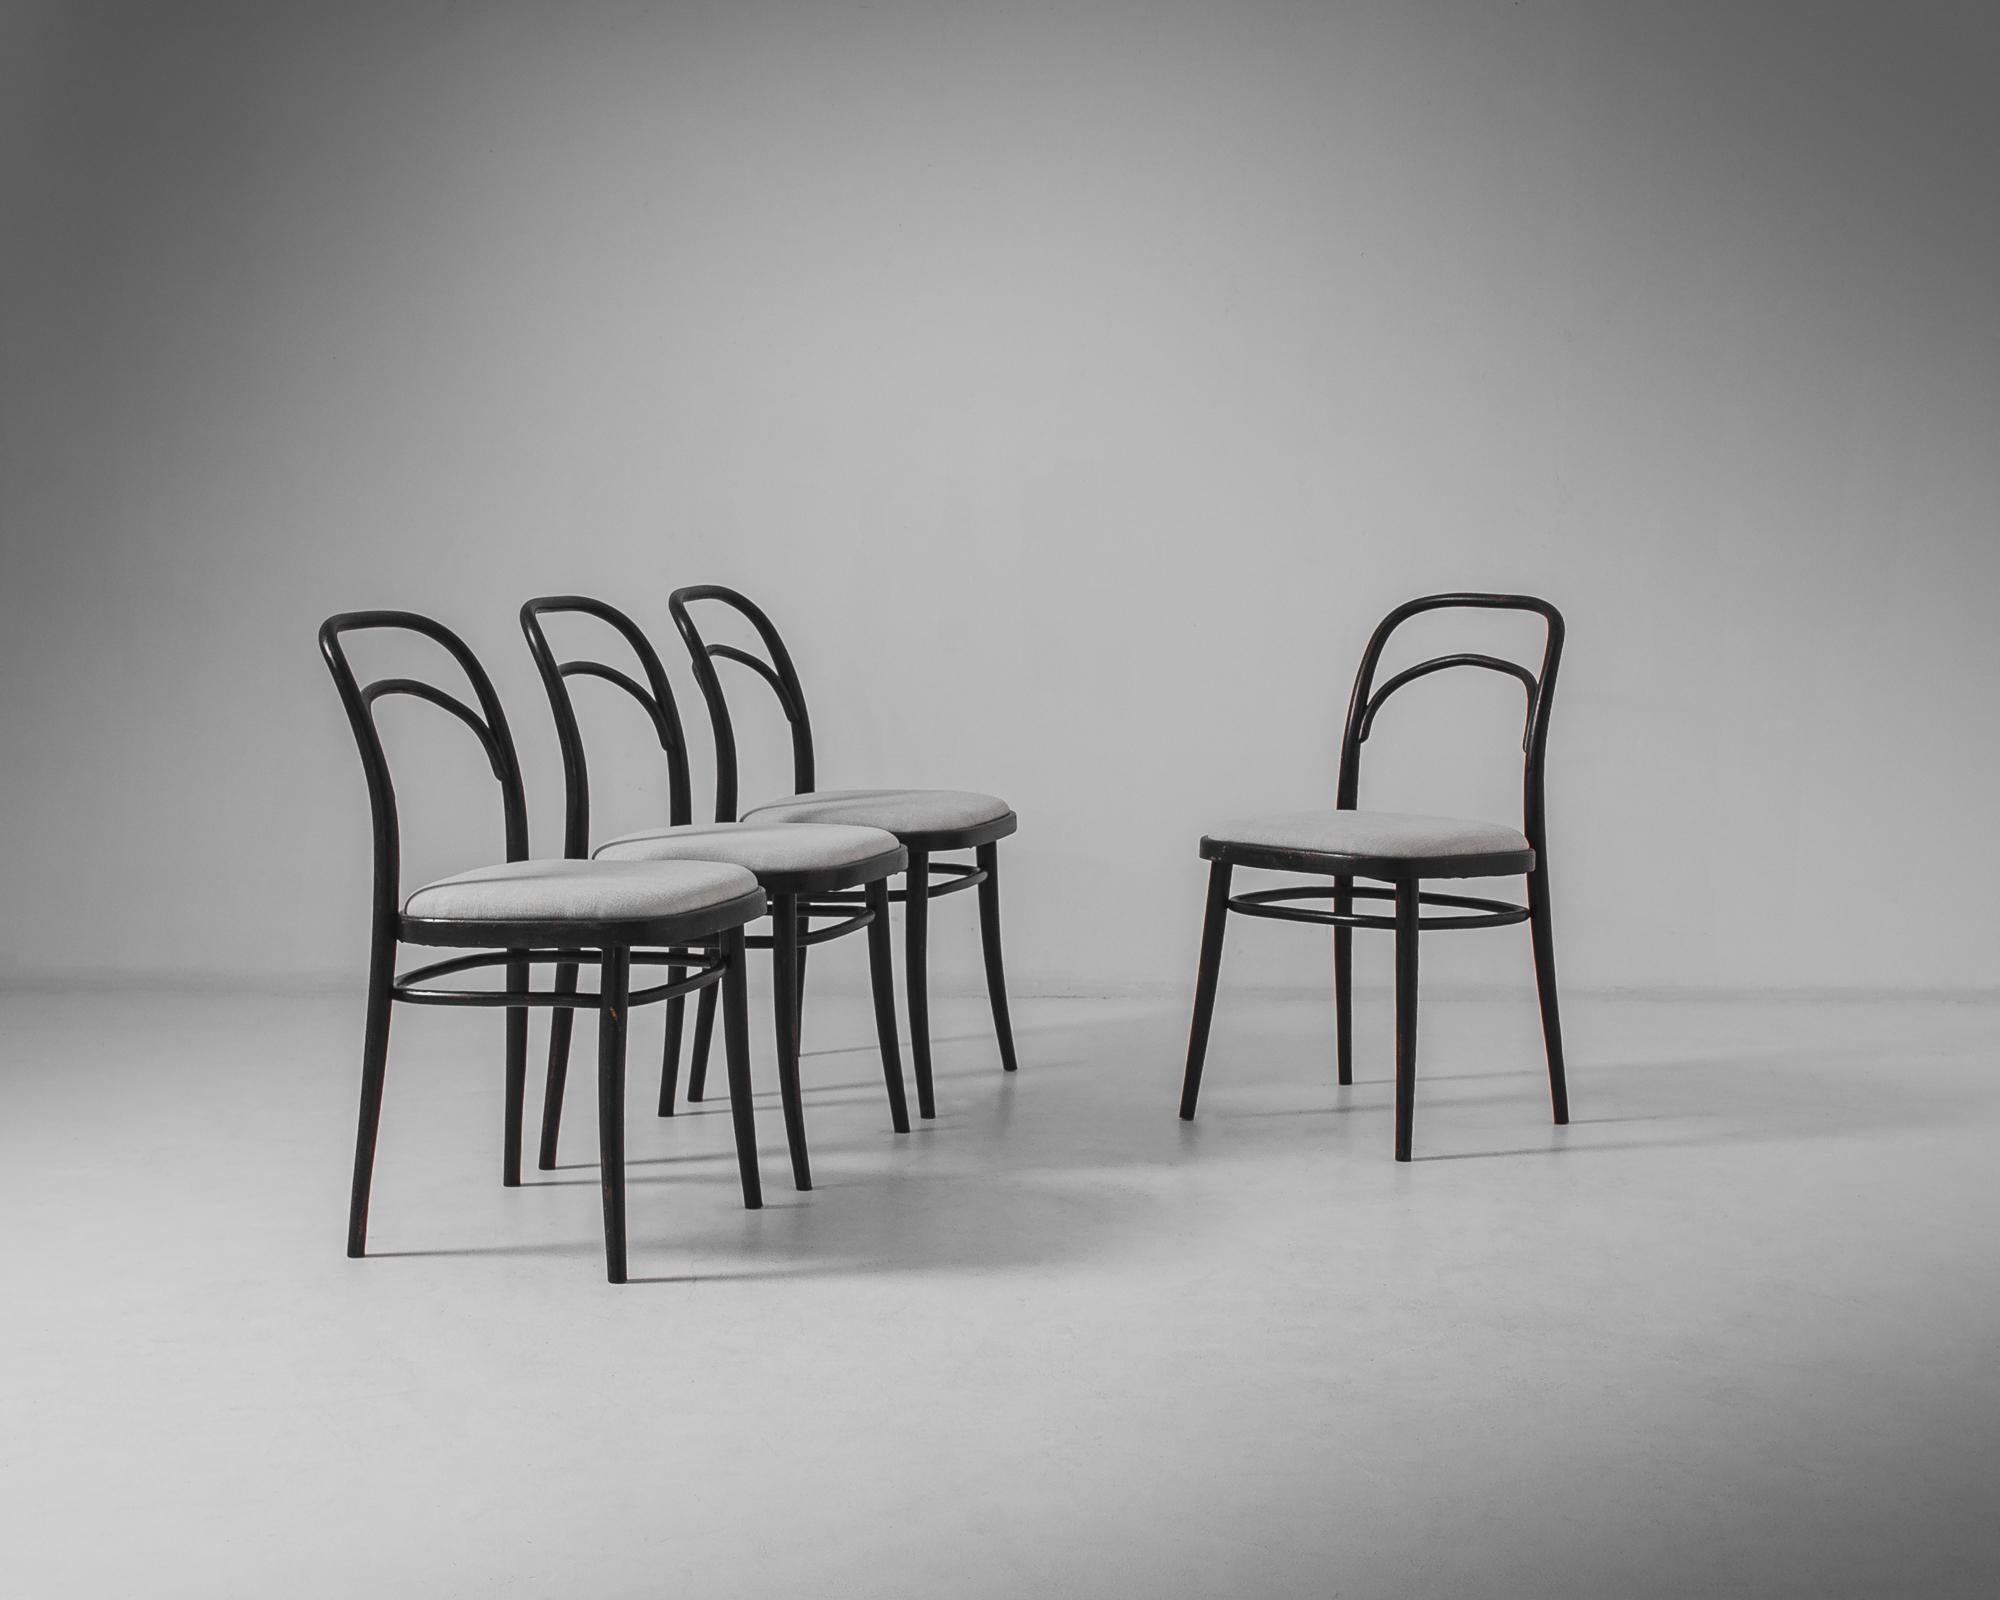 A set of four wooden dining chairs from 1960s Austria. The light, elegant shape, with its curved backrest and subtly tapered legs, is evocative of the bentwood designs of Thonet. The wooden frame is painted a stylish black; a cushioned seat,